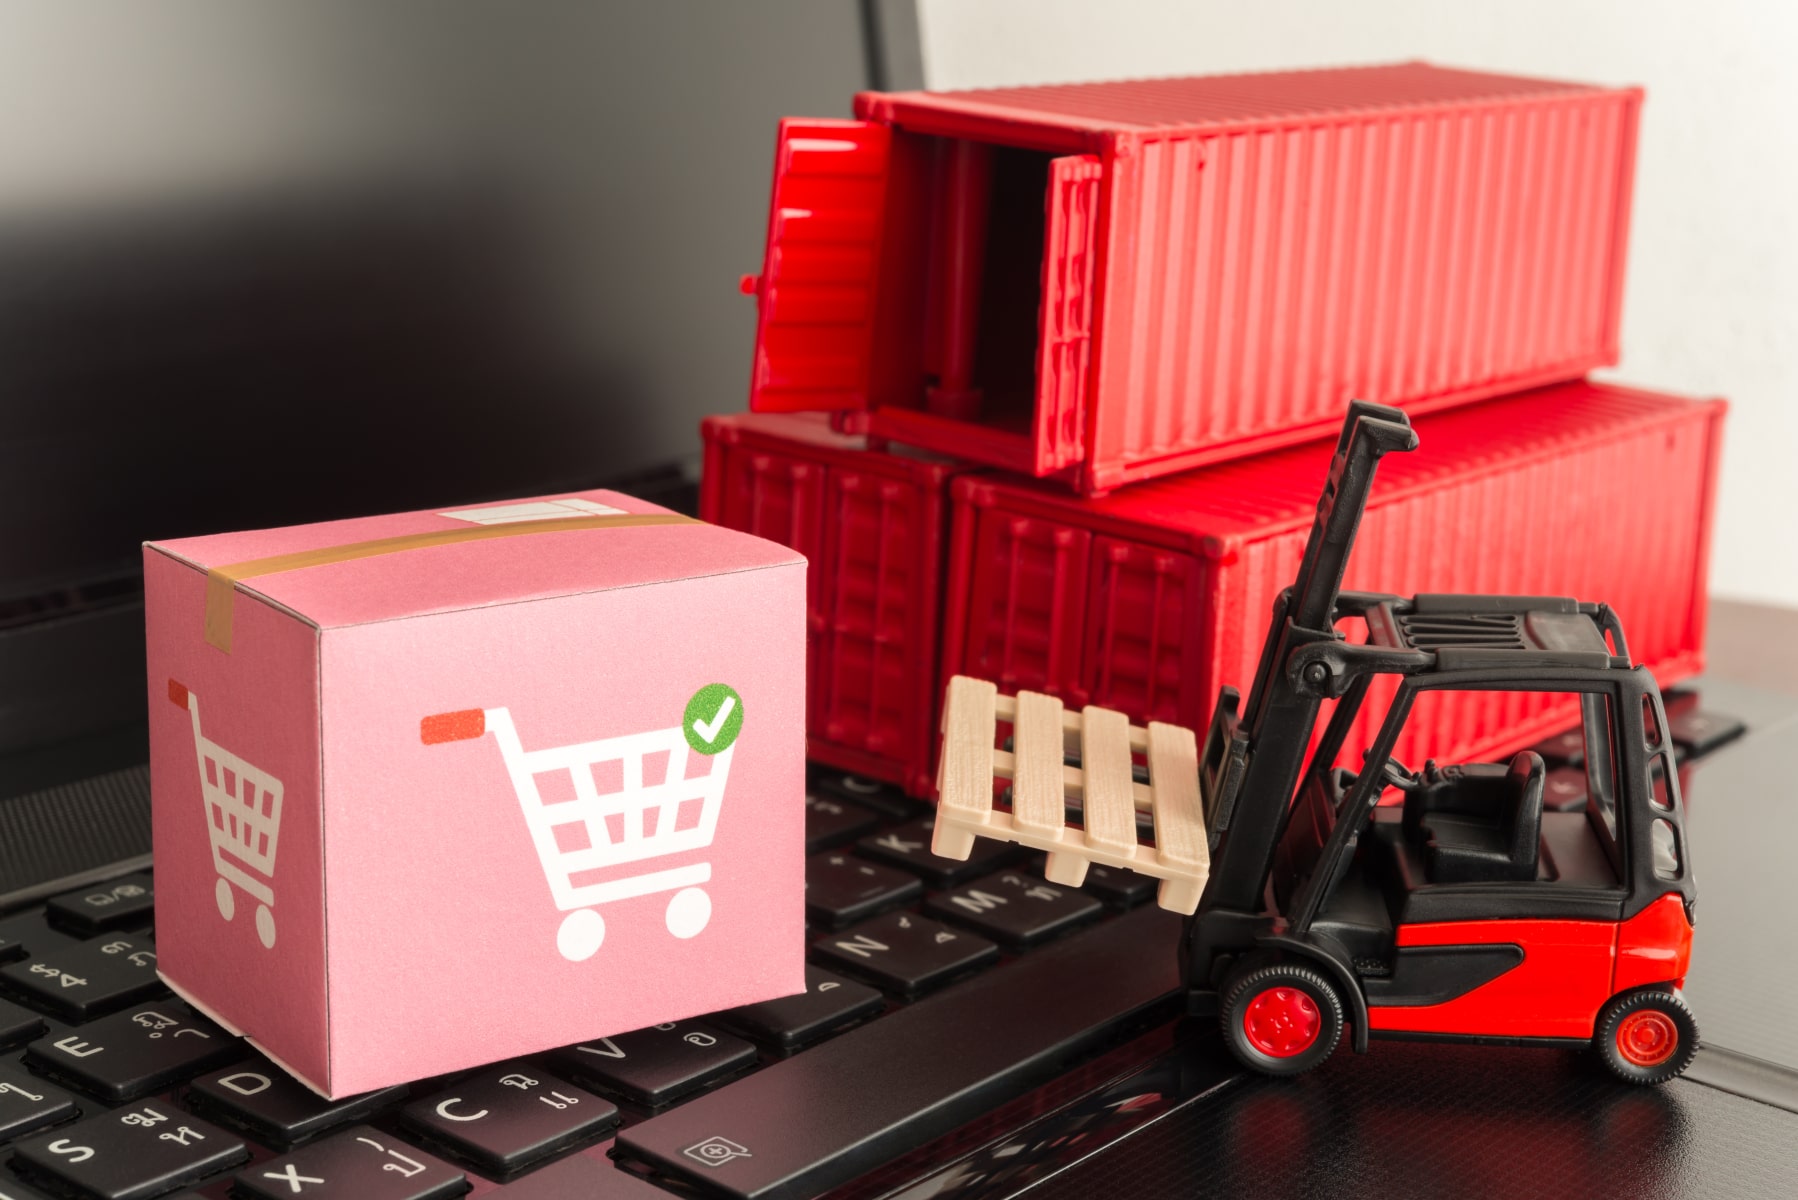 JD’s Marketplace Introduces New Customer-Centric Shipping Policies, Including Free Shipping Across 13 Product Categories